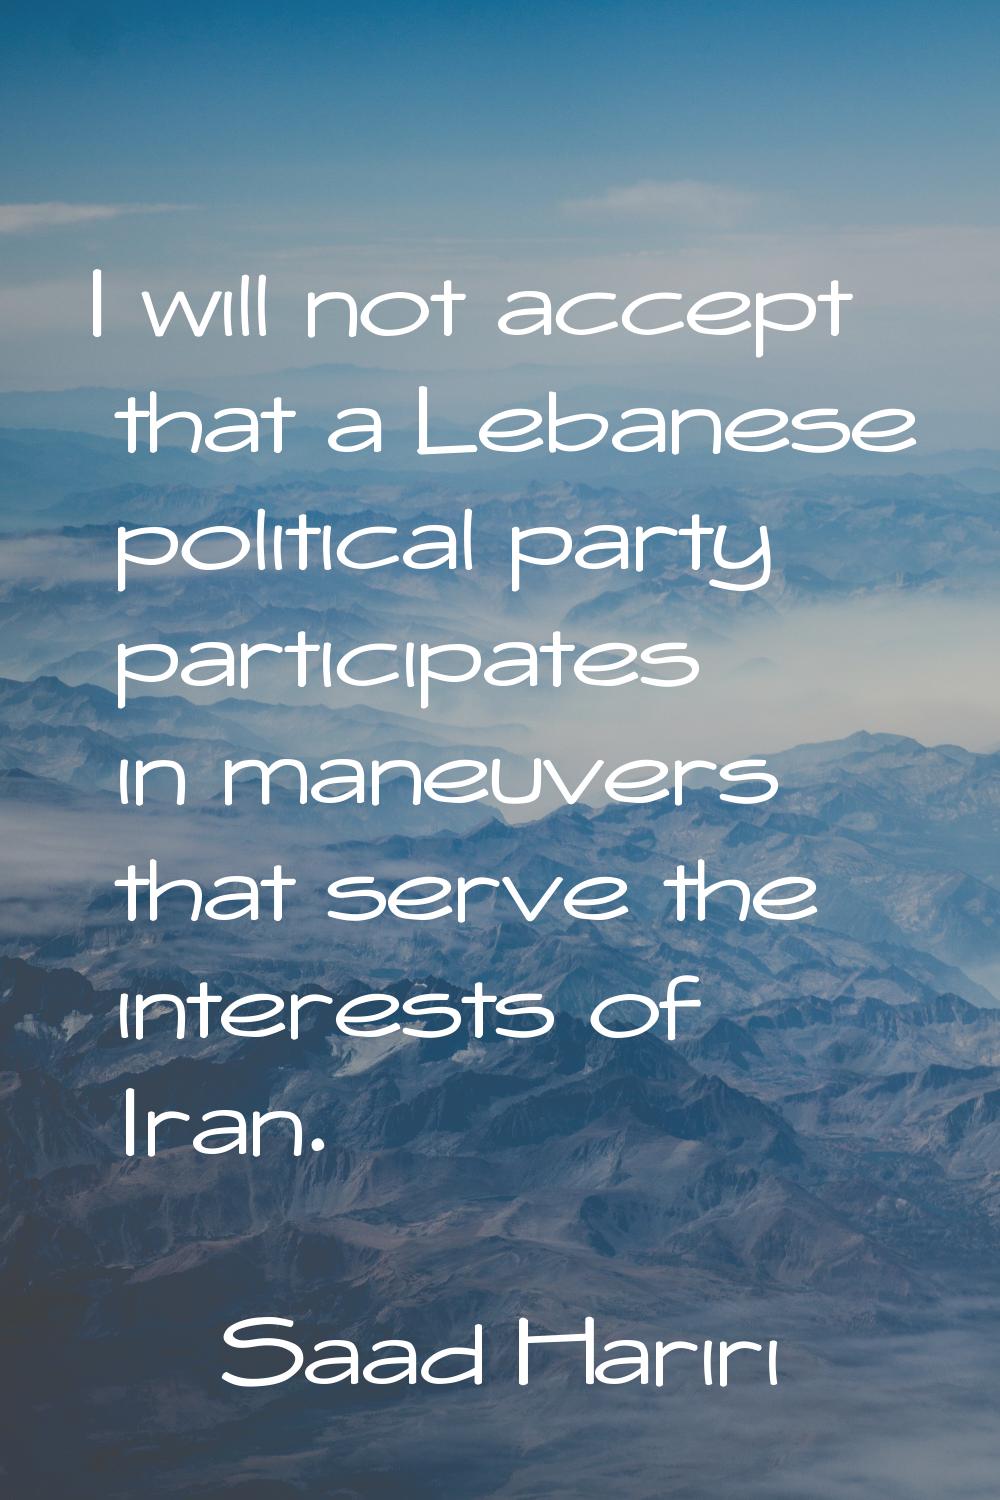 I will not accept that a Lebanese political party participates in maneuvers that serve the interest